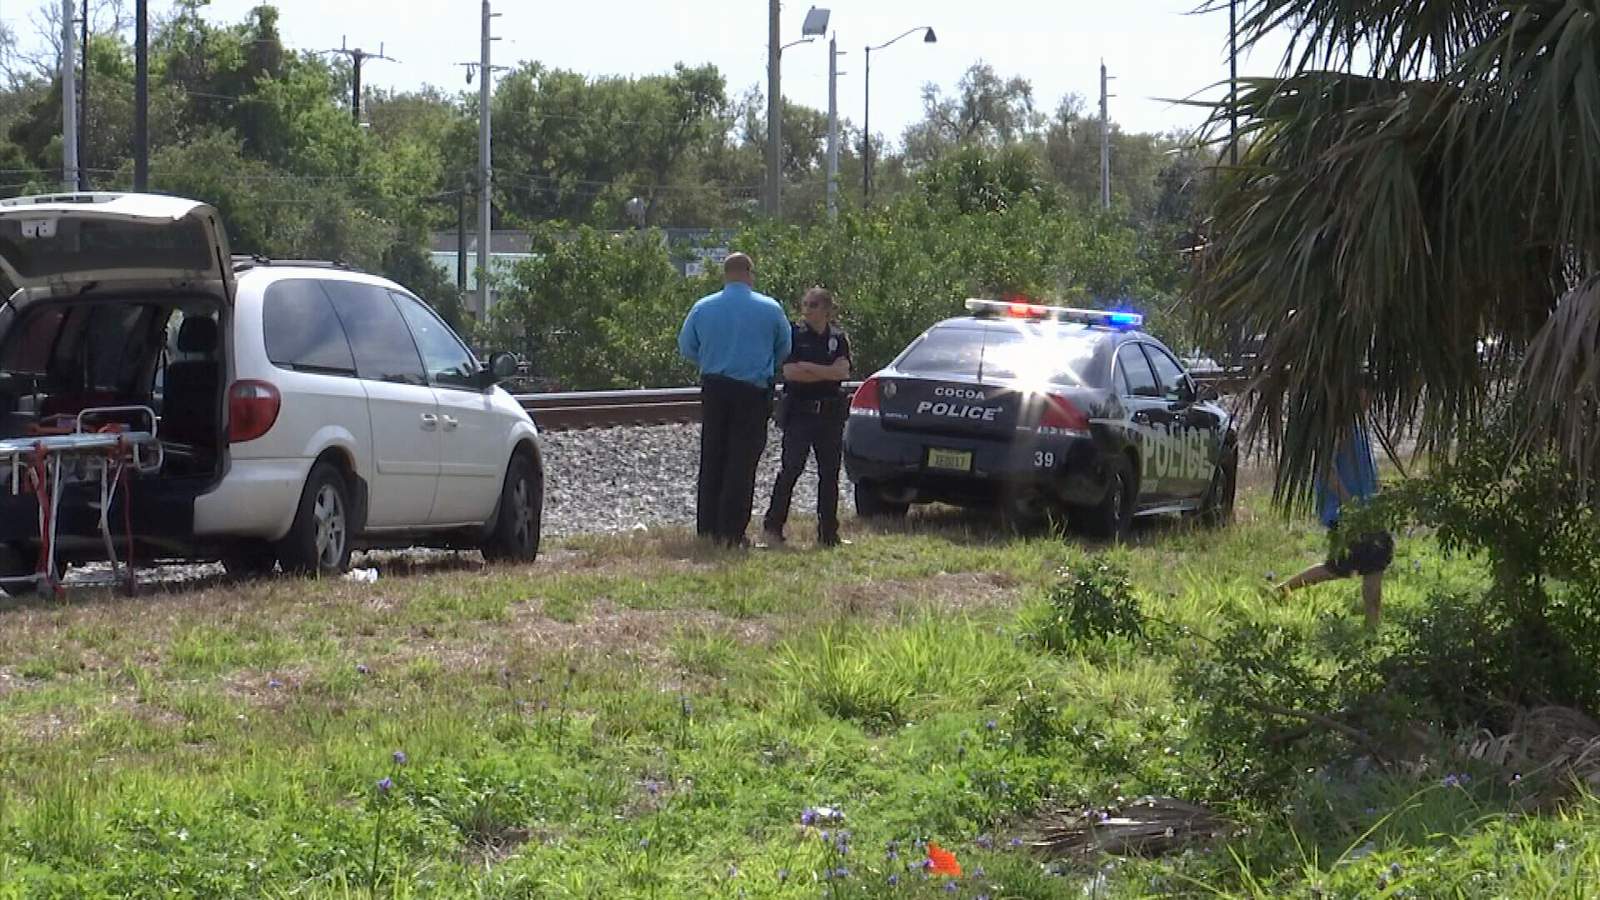 Woman, 32, struck, killed by train in Cocoa